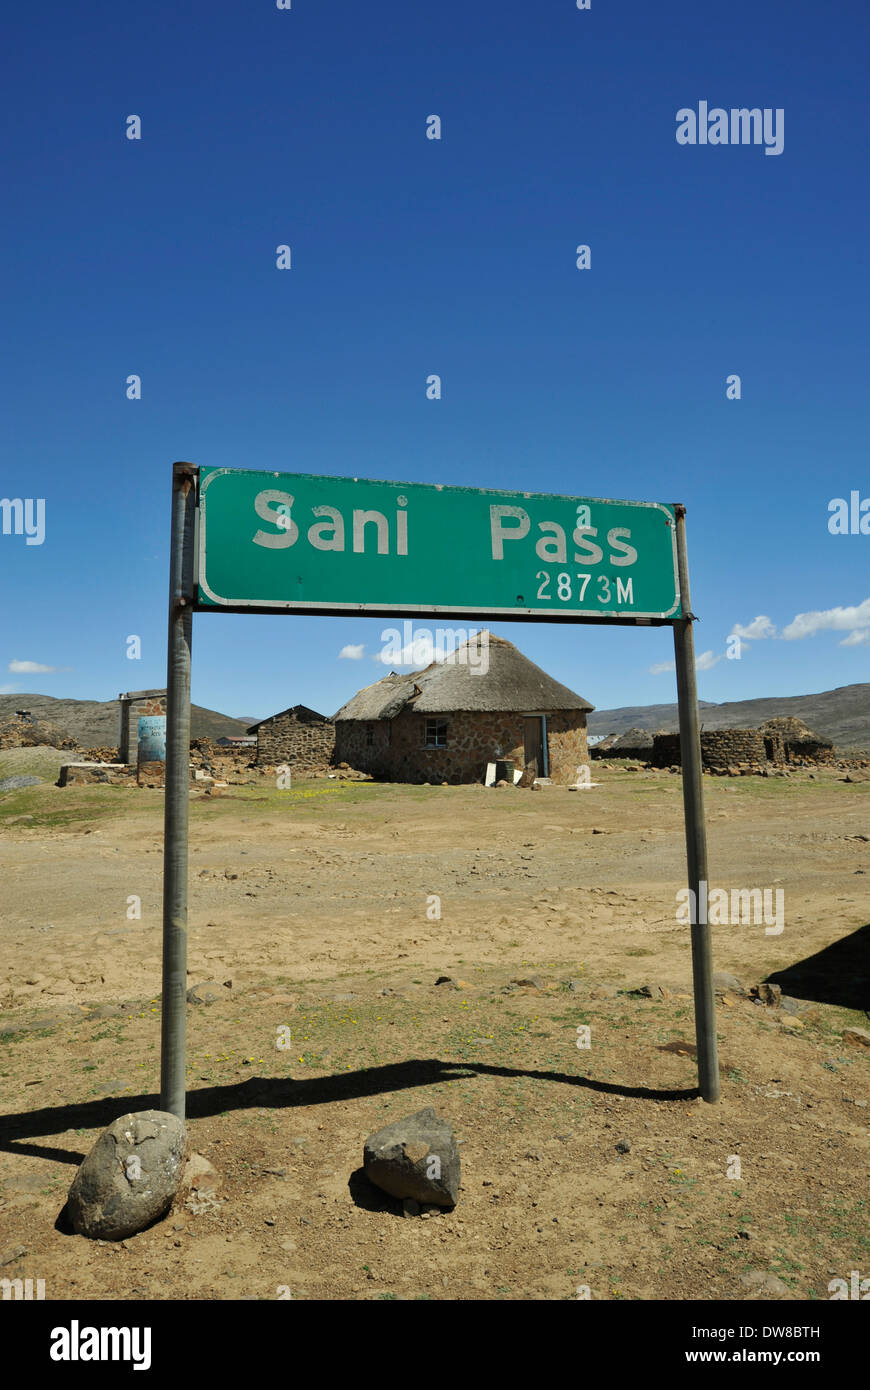 Sani Pass, Kingdom of Lesotho, sign, top of Maluti mountains at border with South Africa, landscape, house, blue sky Stock Photo